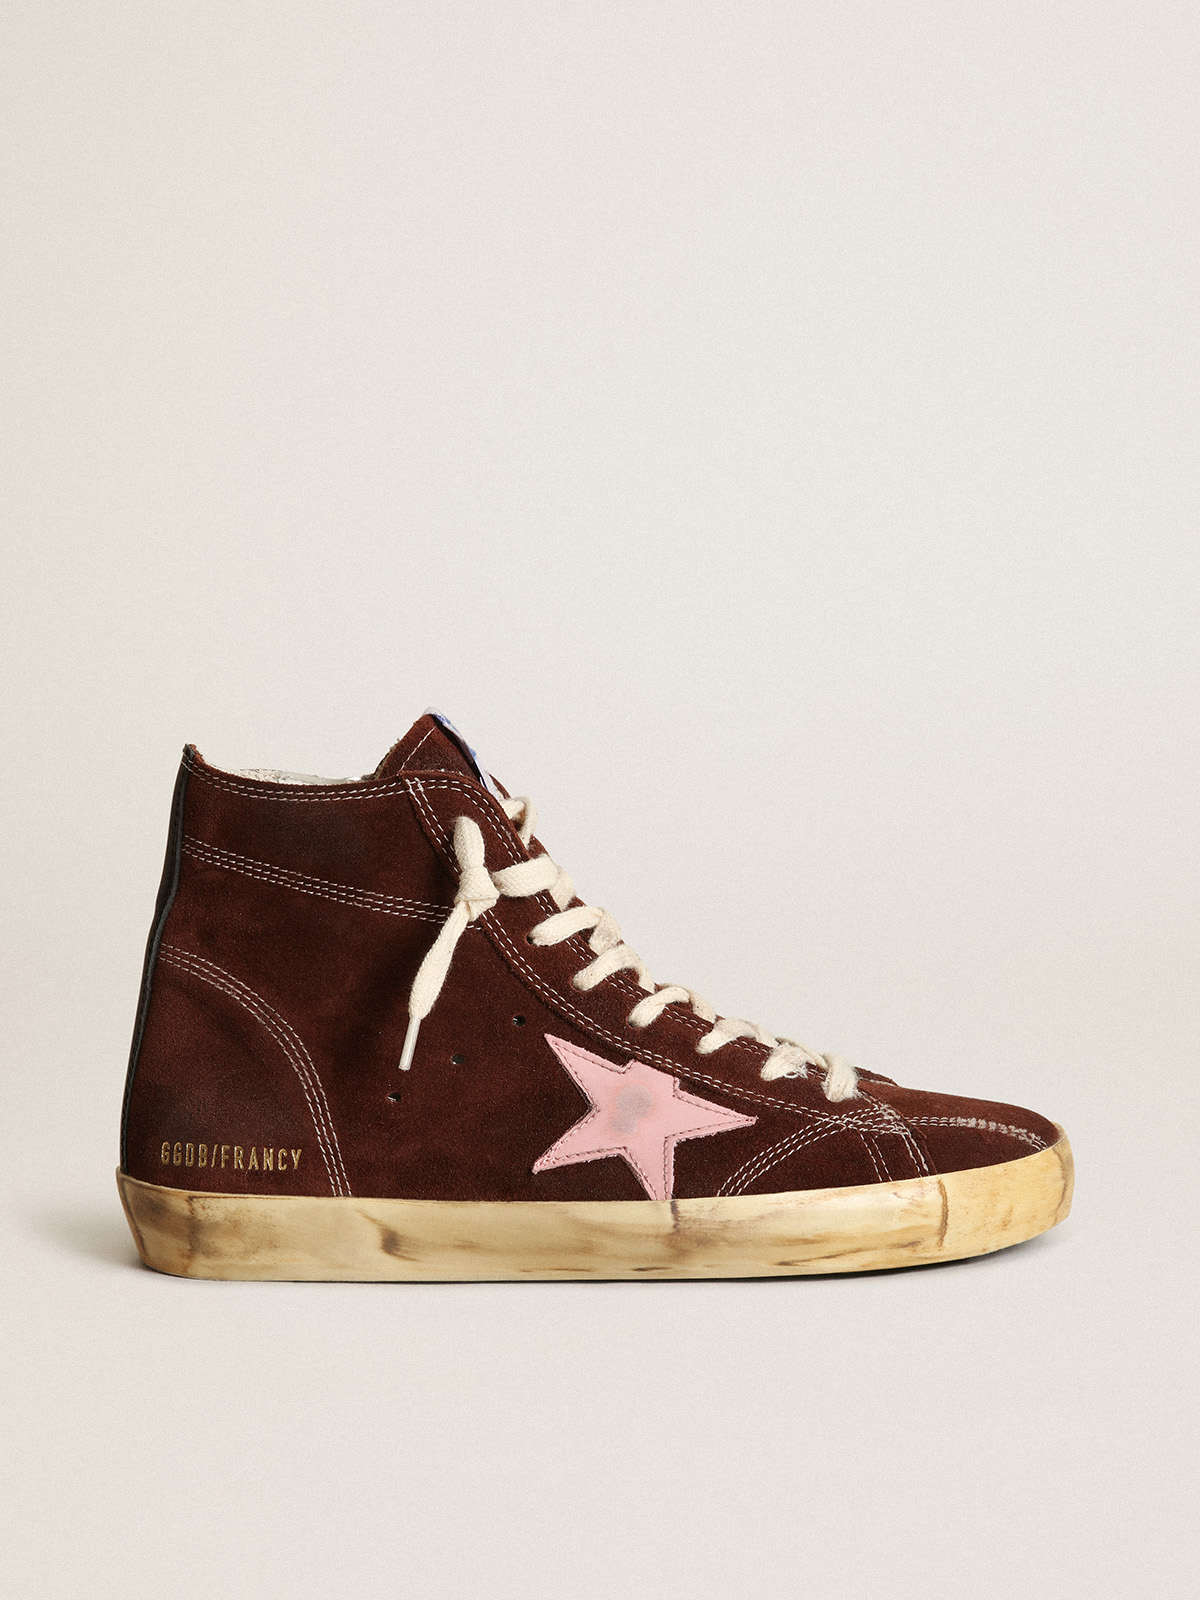 Francy sneakers in brown suede with pink leather star and black nappa leather  heel tab | Golden Goose